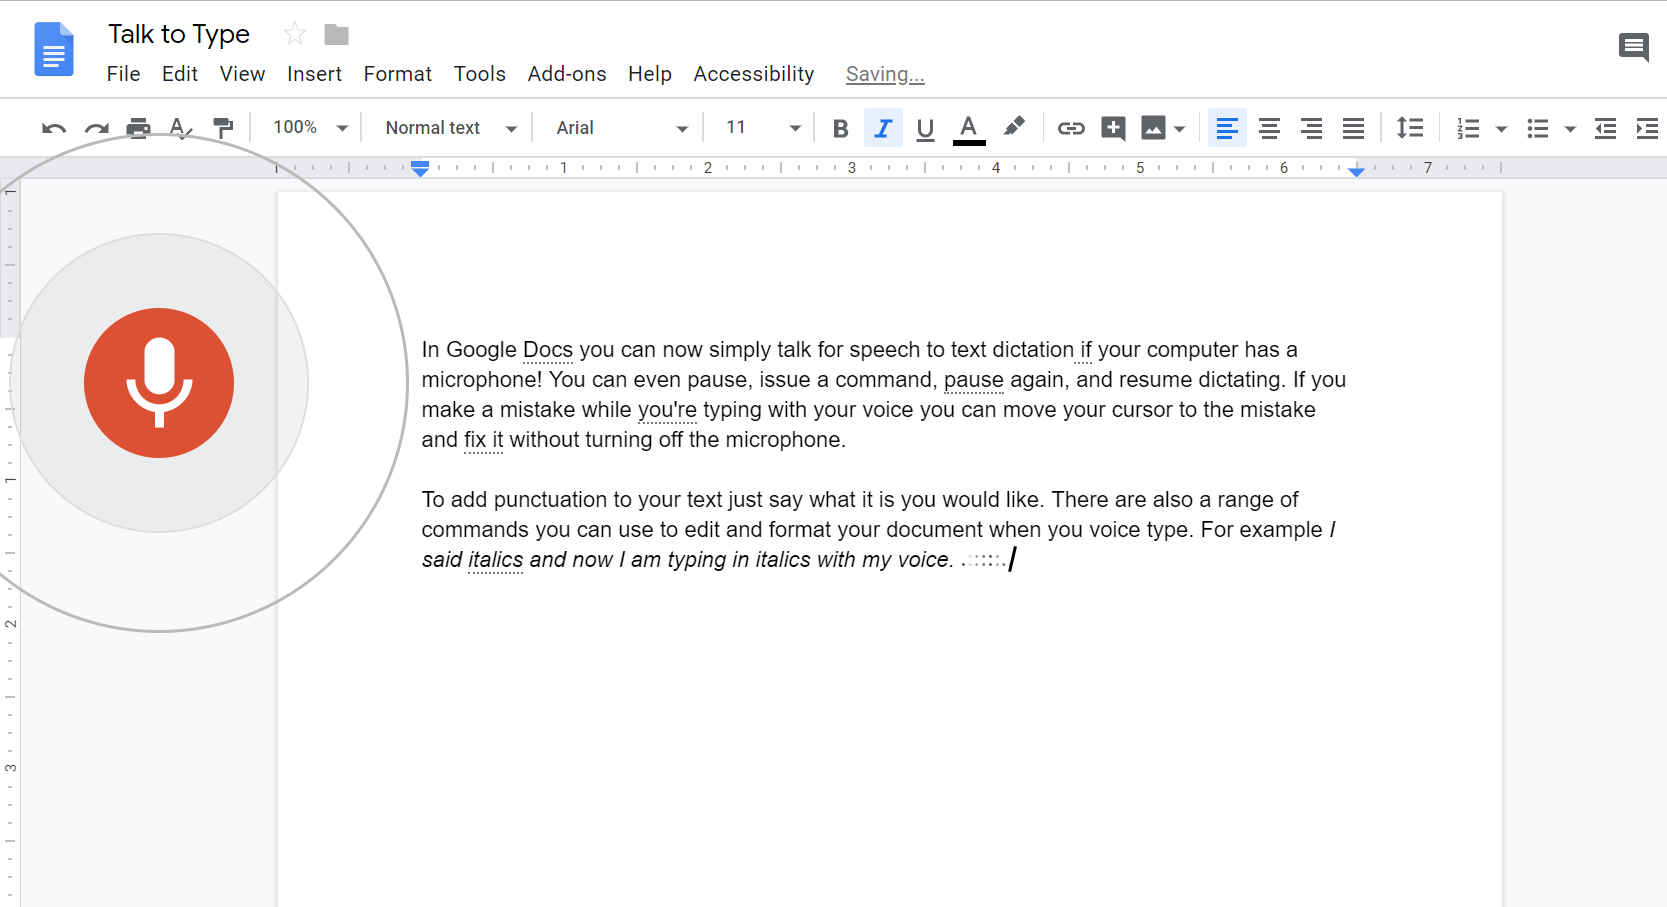 Screen capture of Google Docs Talk to Type in use